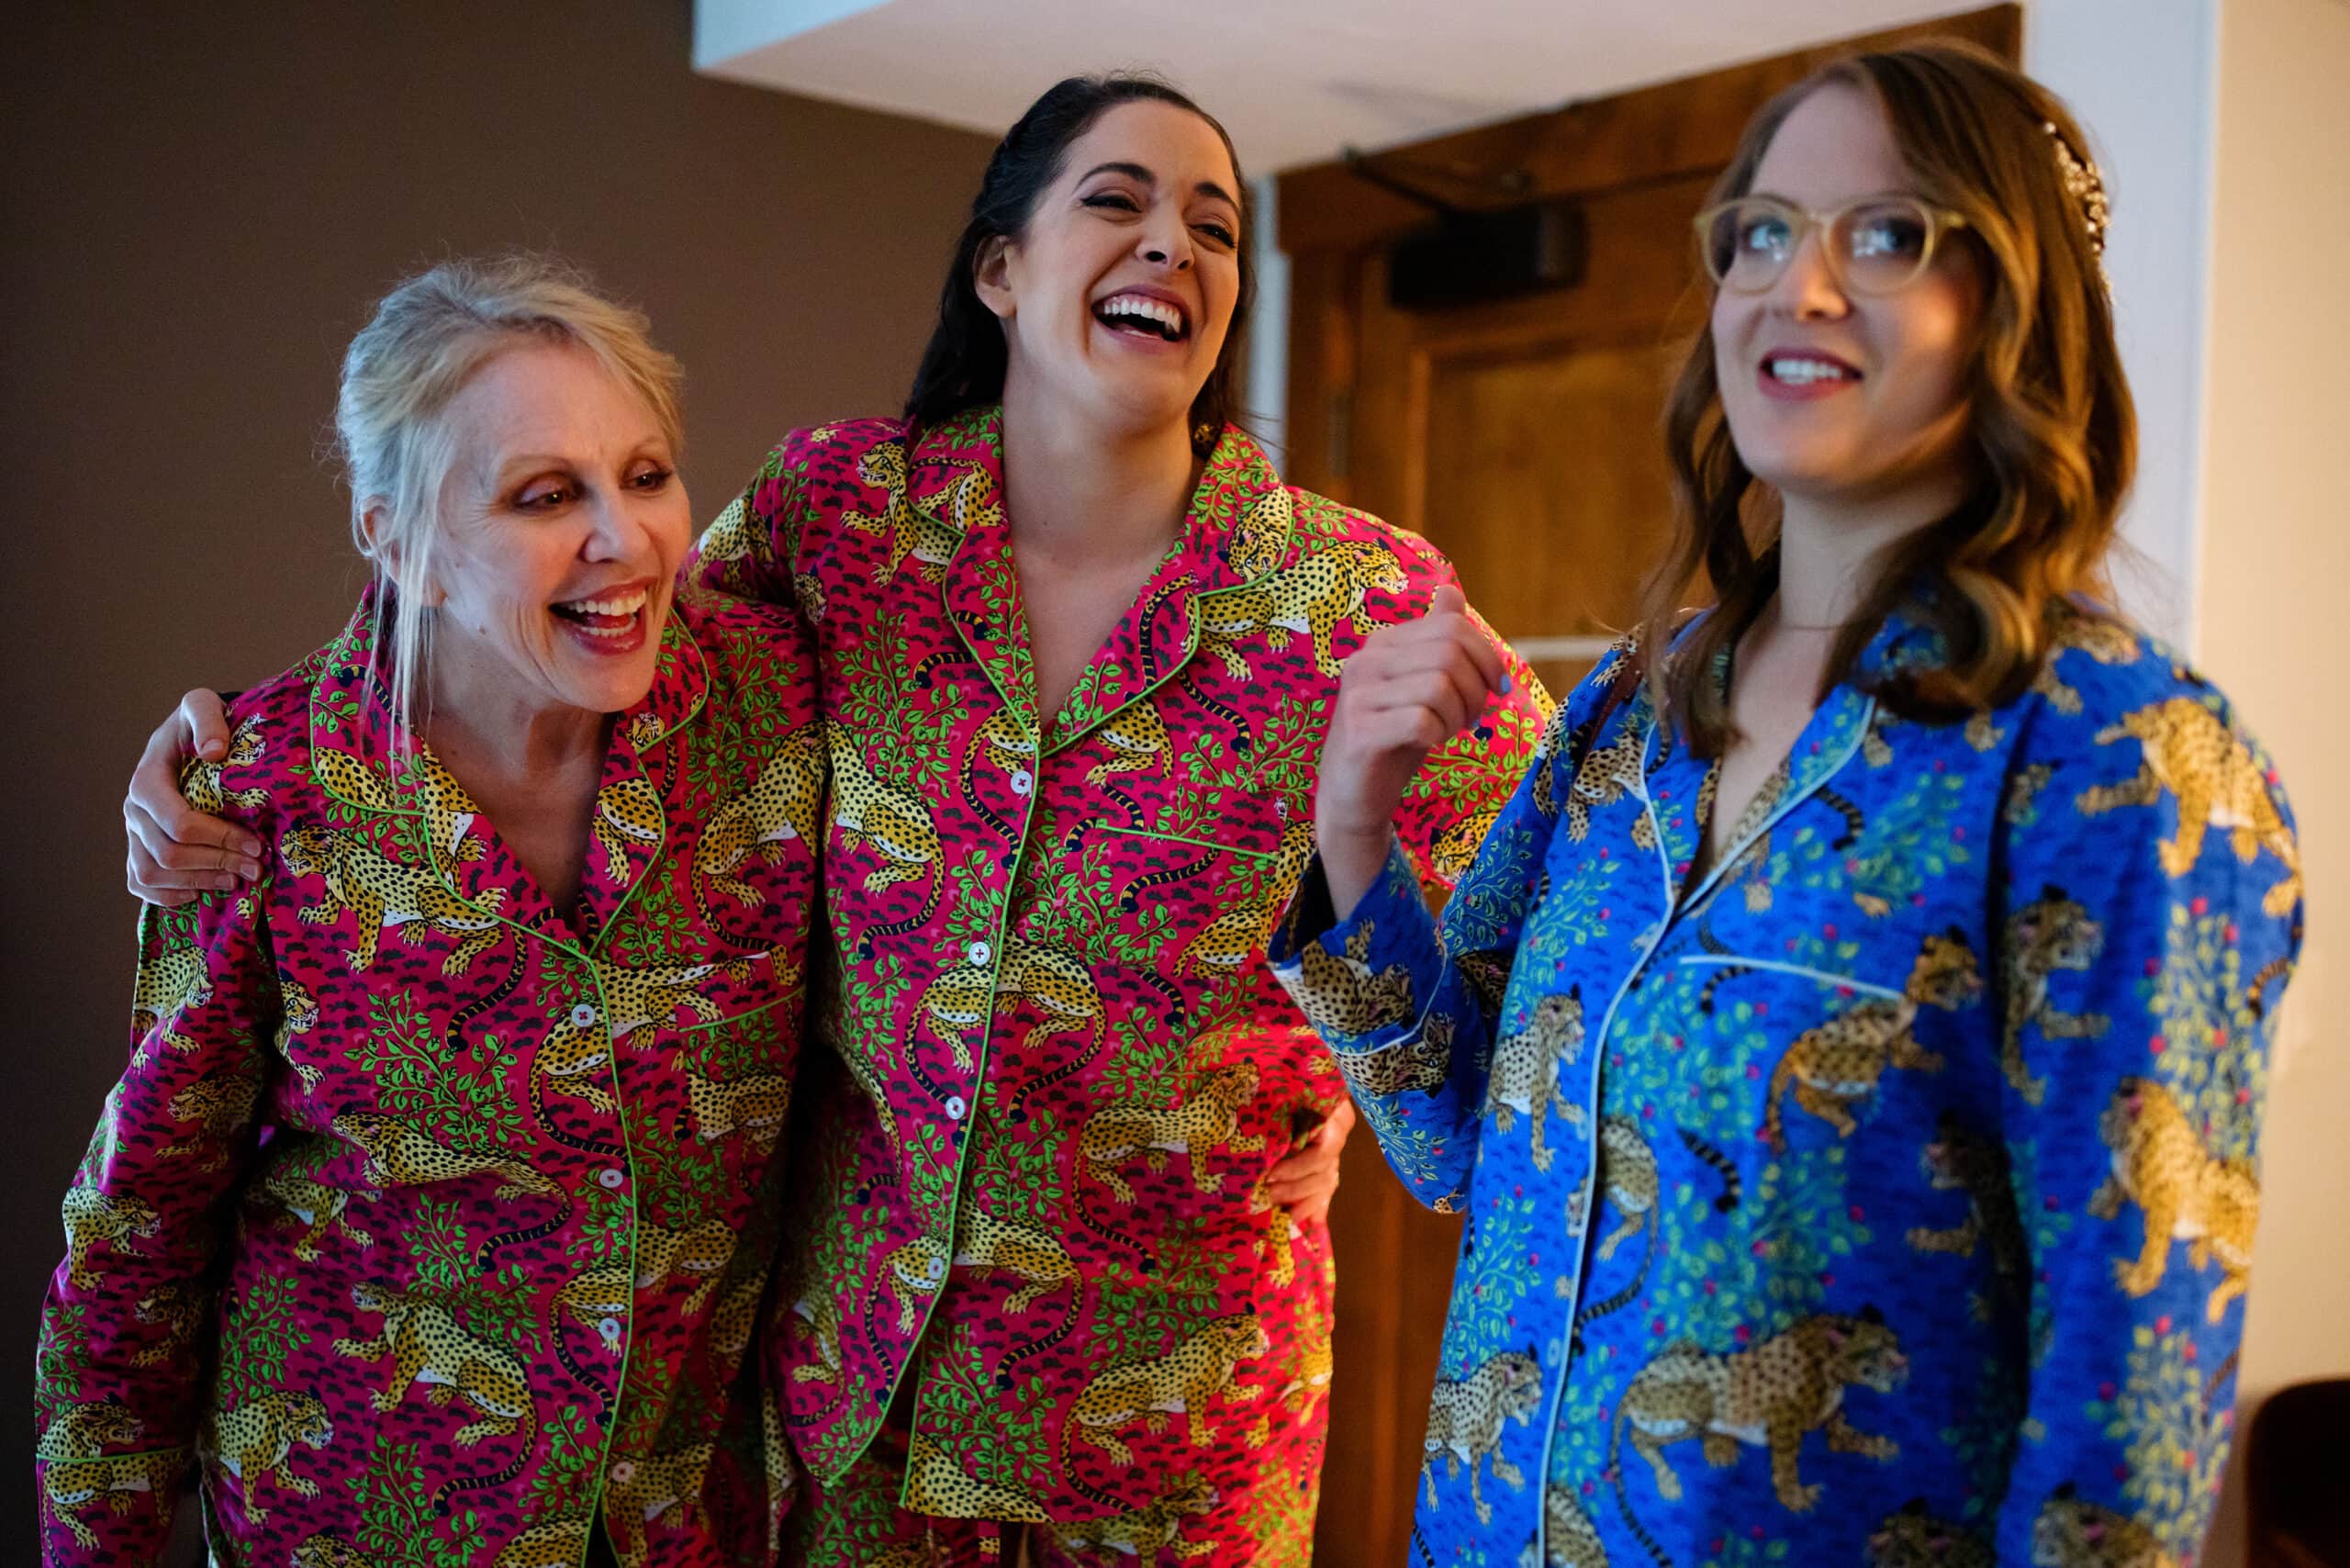 The bride, sister and her mother laugh together while getting ready